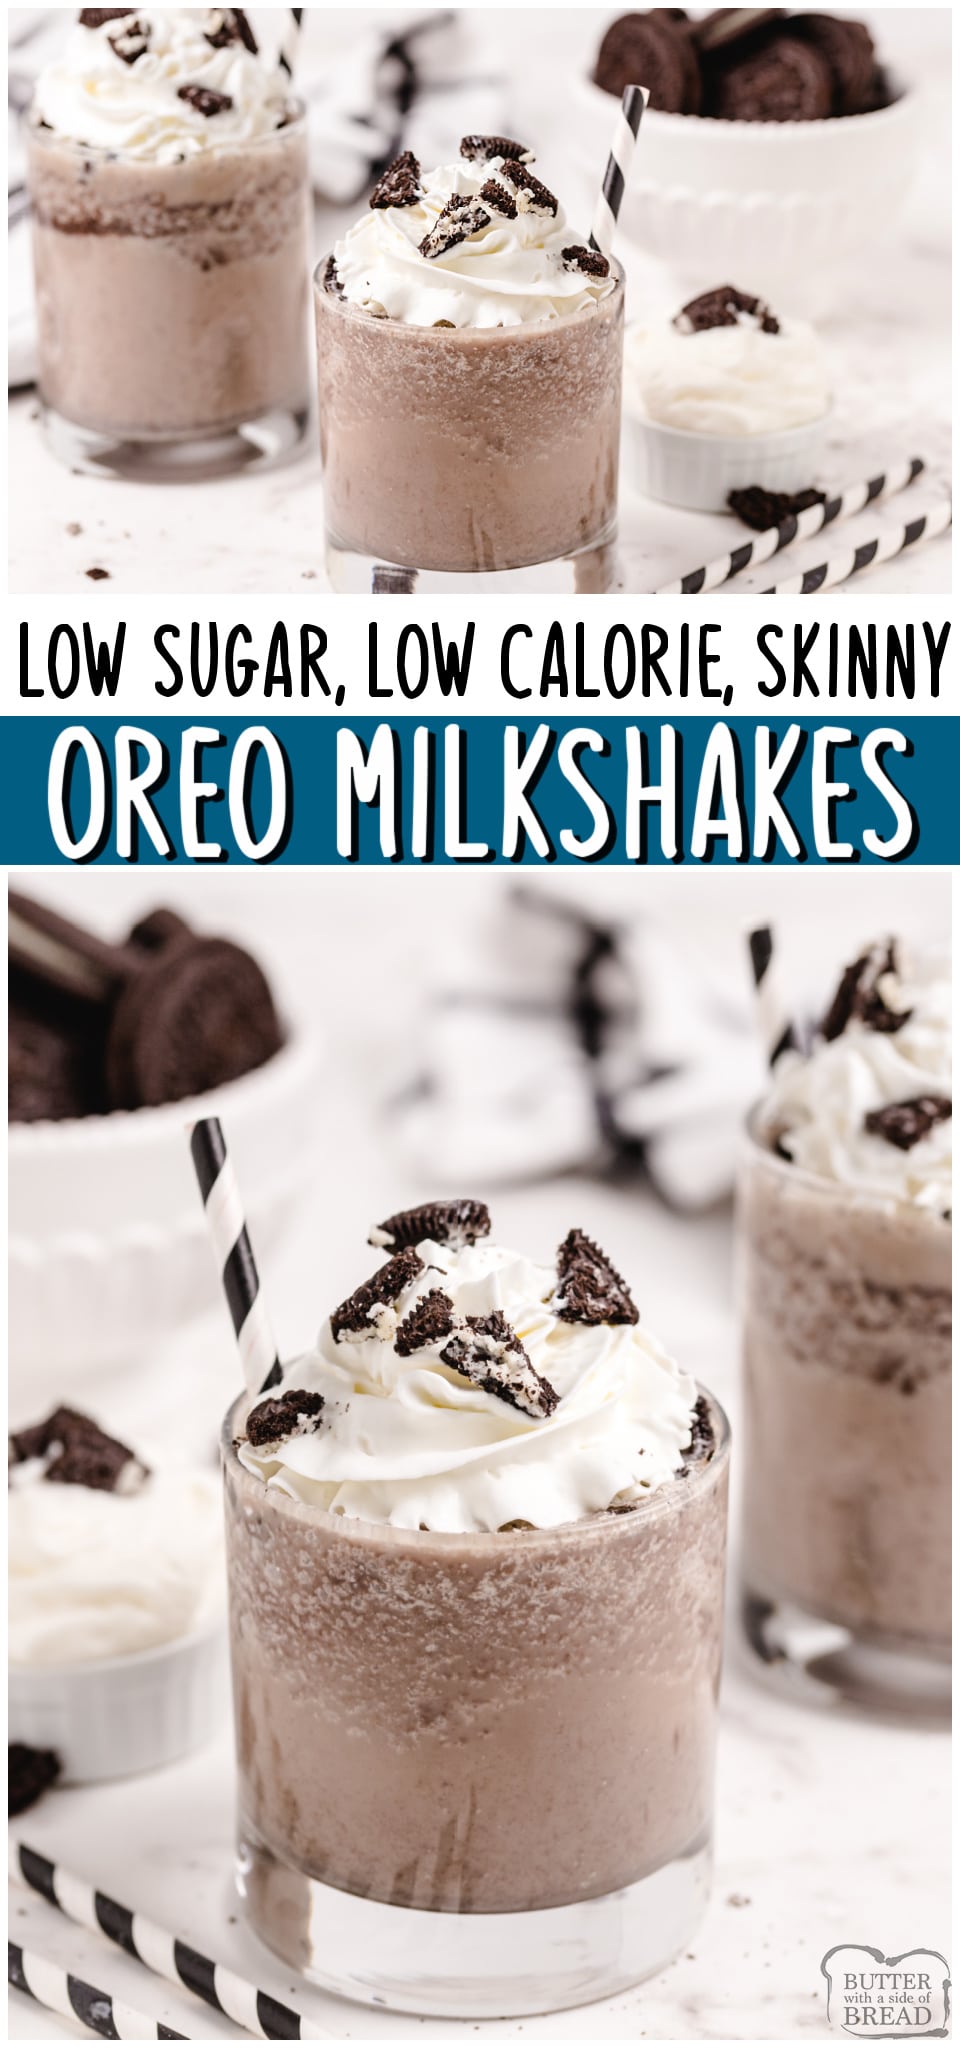 Skinny Oreo Milkshakes made fast with just a handful of ingredients! This easy Cookies & Cream Milkshake tastes great & is low cal, low fat & low sugar! #skinny #Oreo #cookiesandCream #milkshake #dessert #lowsugar #lowcal #easyrecipe from BUTTER WITH A SIDE OF BREAD